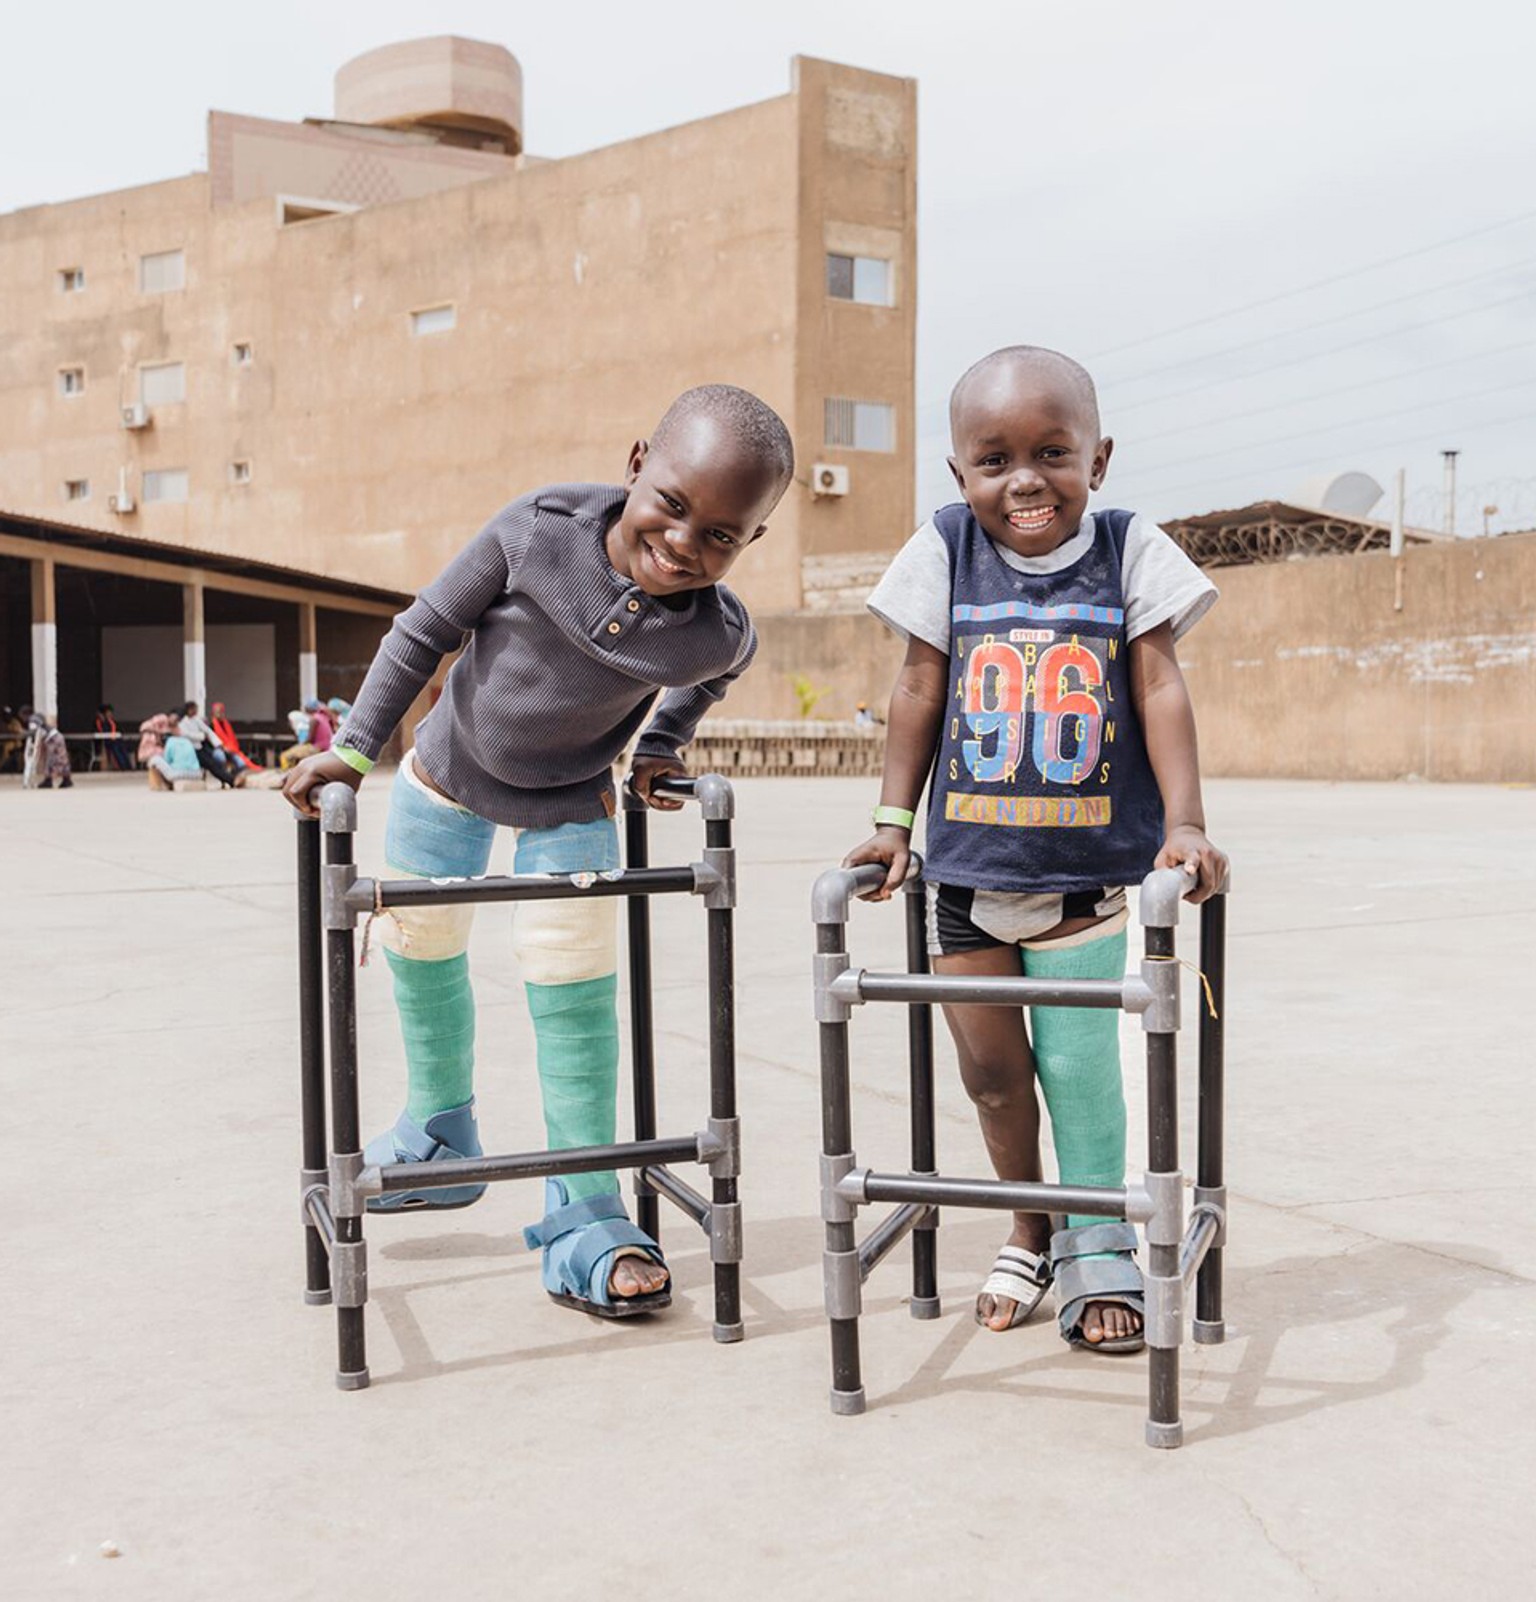 Two happy children with casts and walkers outside a concrete industrial complex